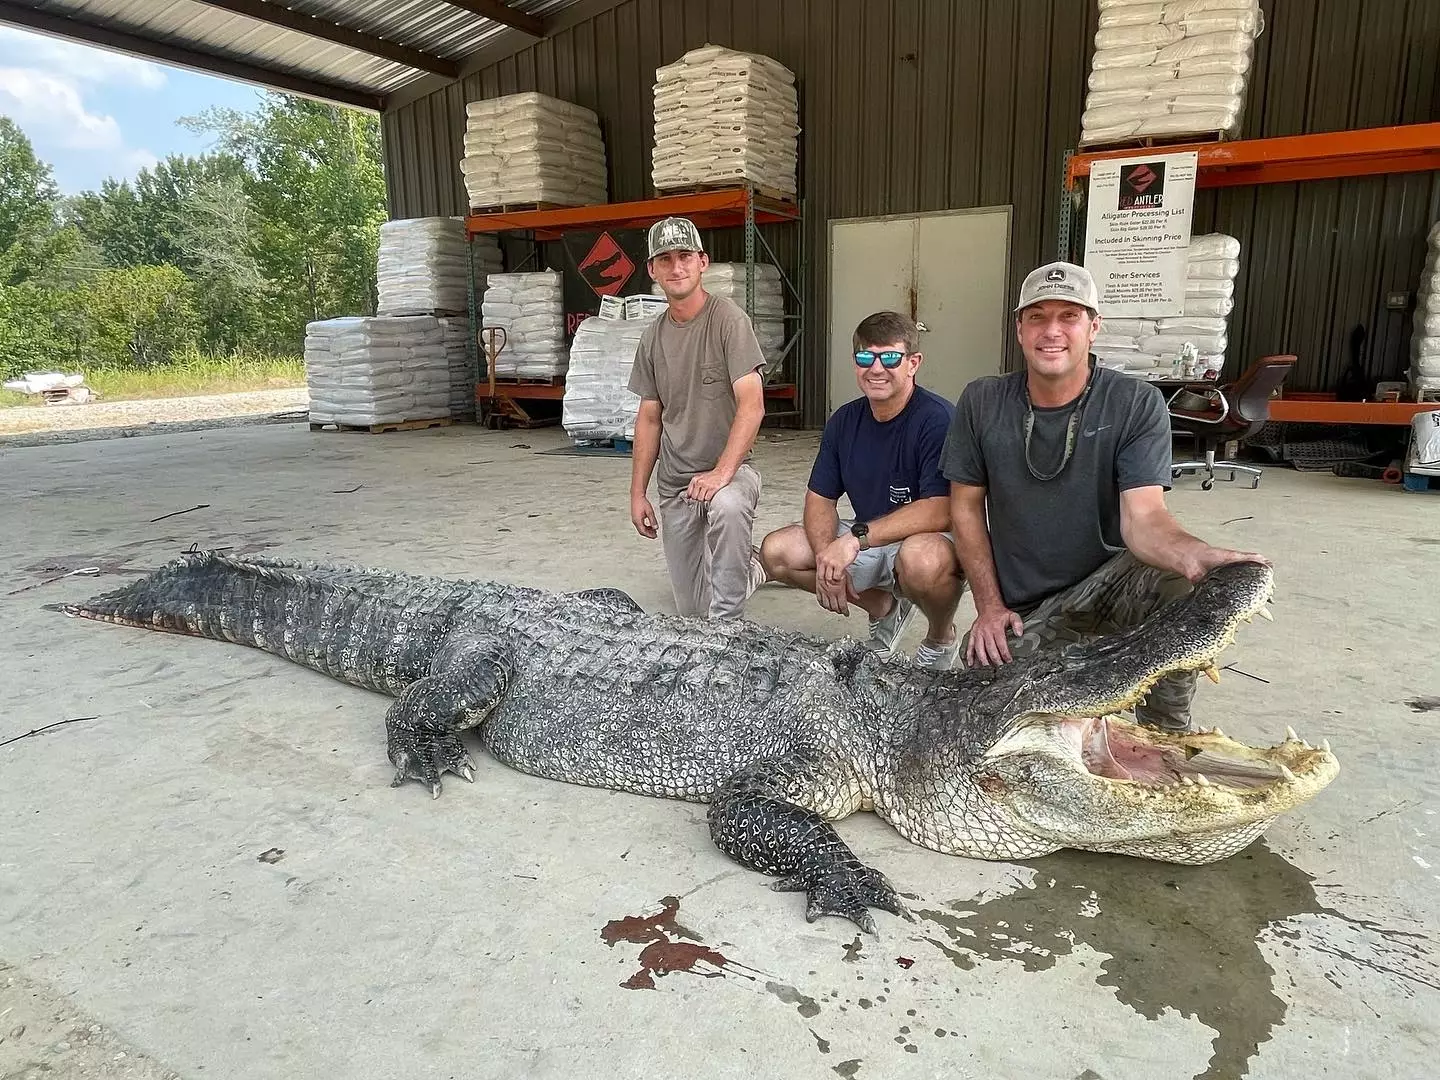 The group caught the massive alligator over the weekend.